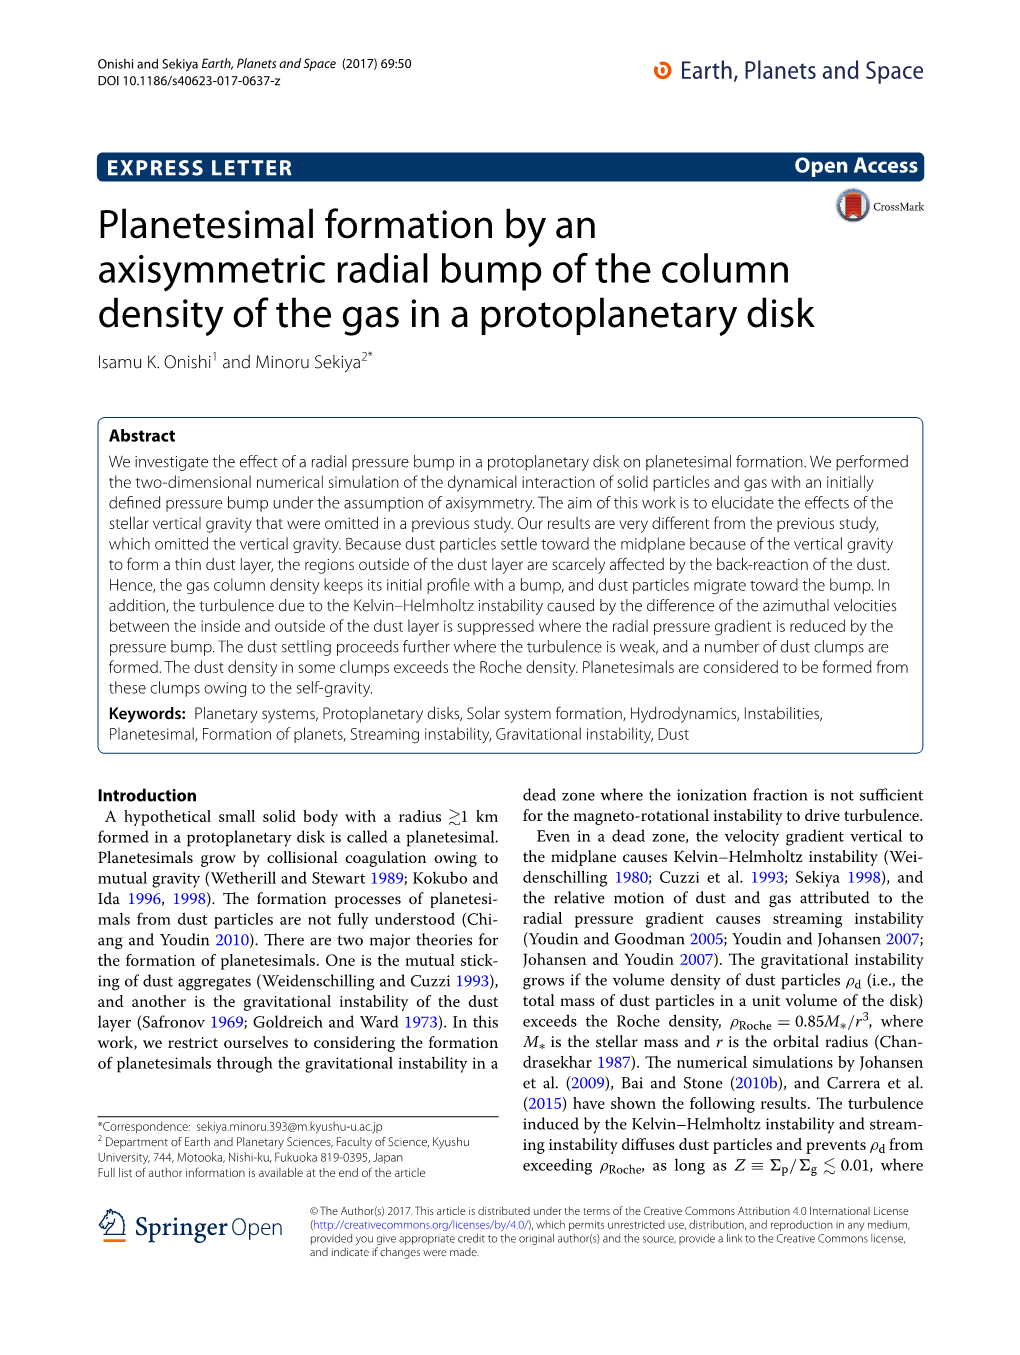 Planetesimal Formation by an Axisymmetric Radial Bump of the Column Density of the Gas in a Protoplanetary Disk Isamu K